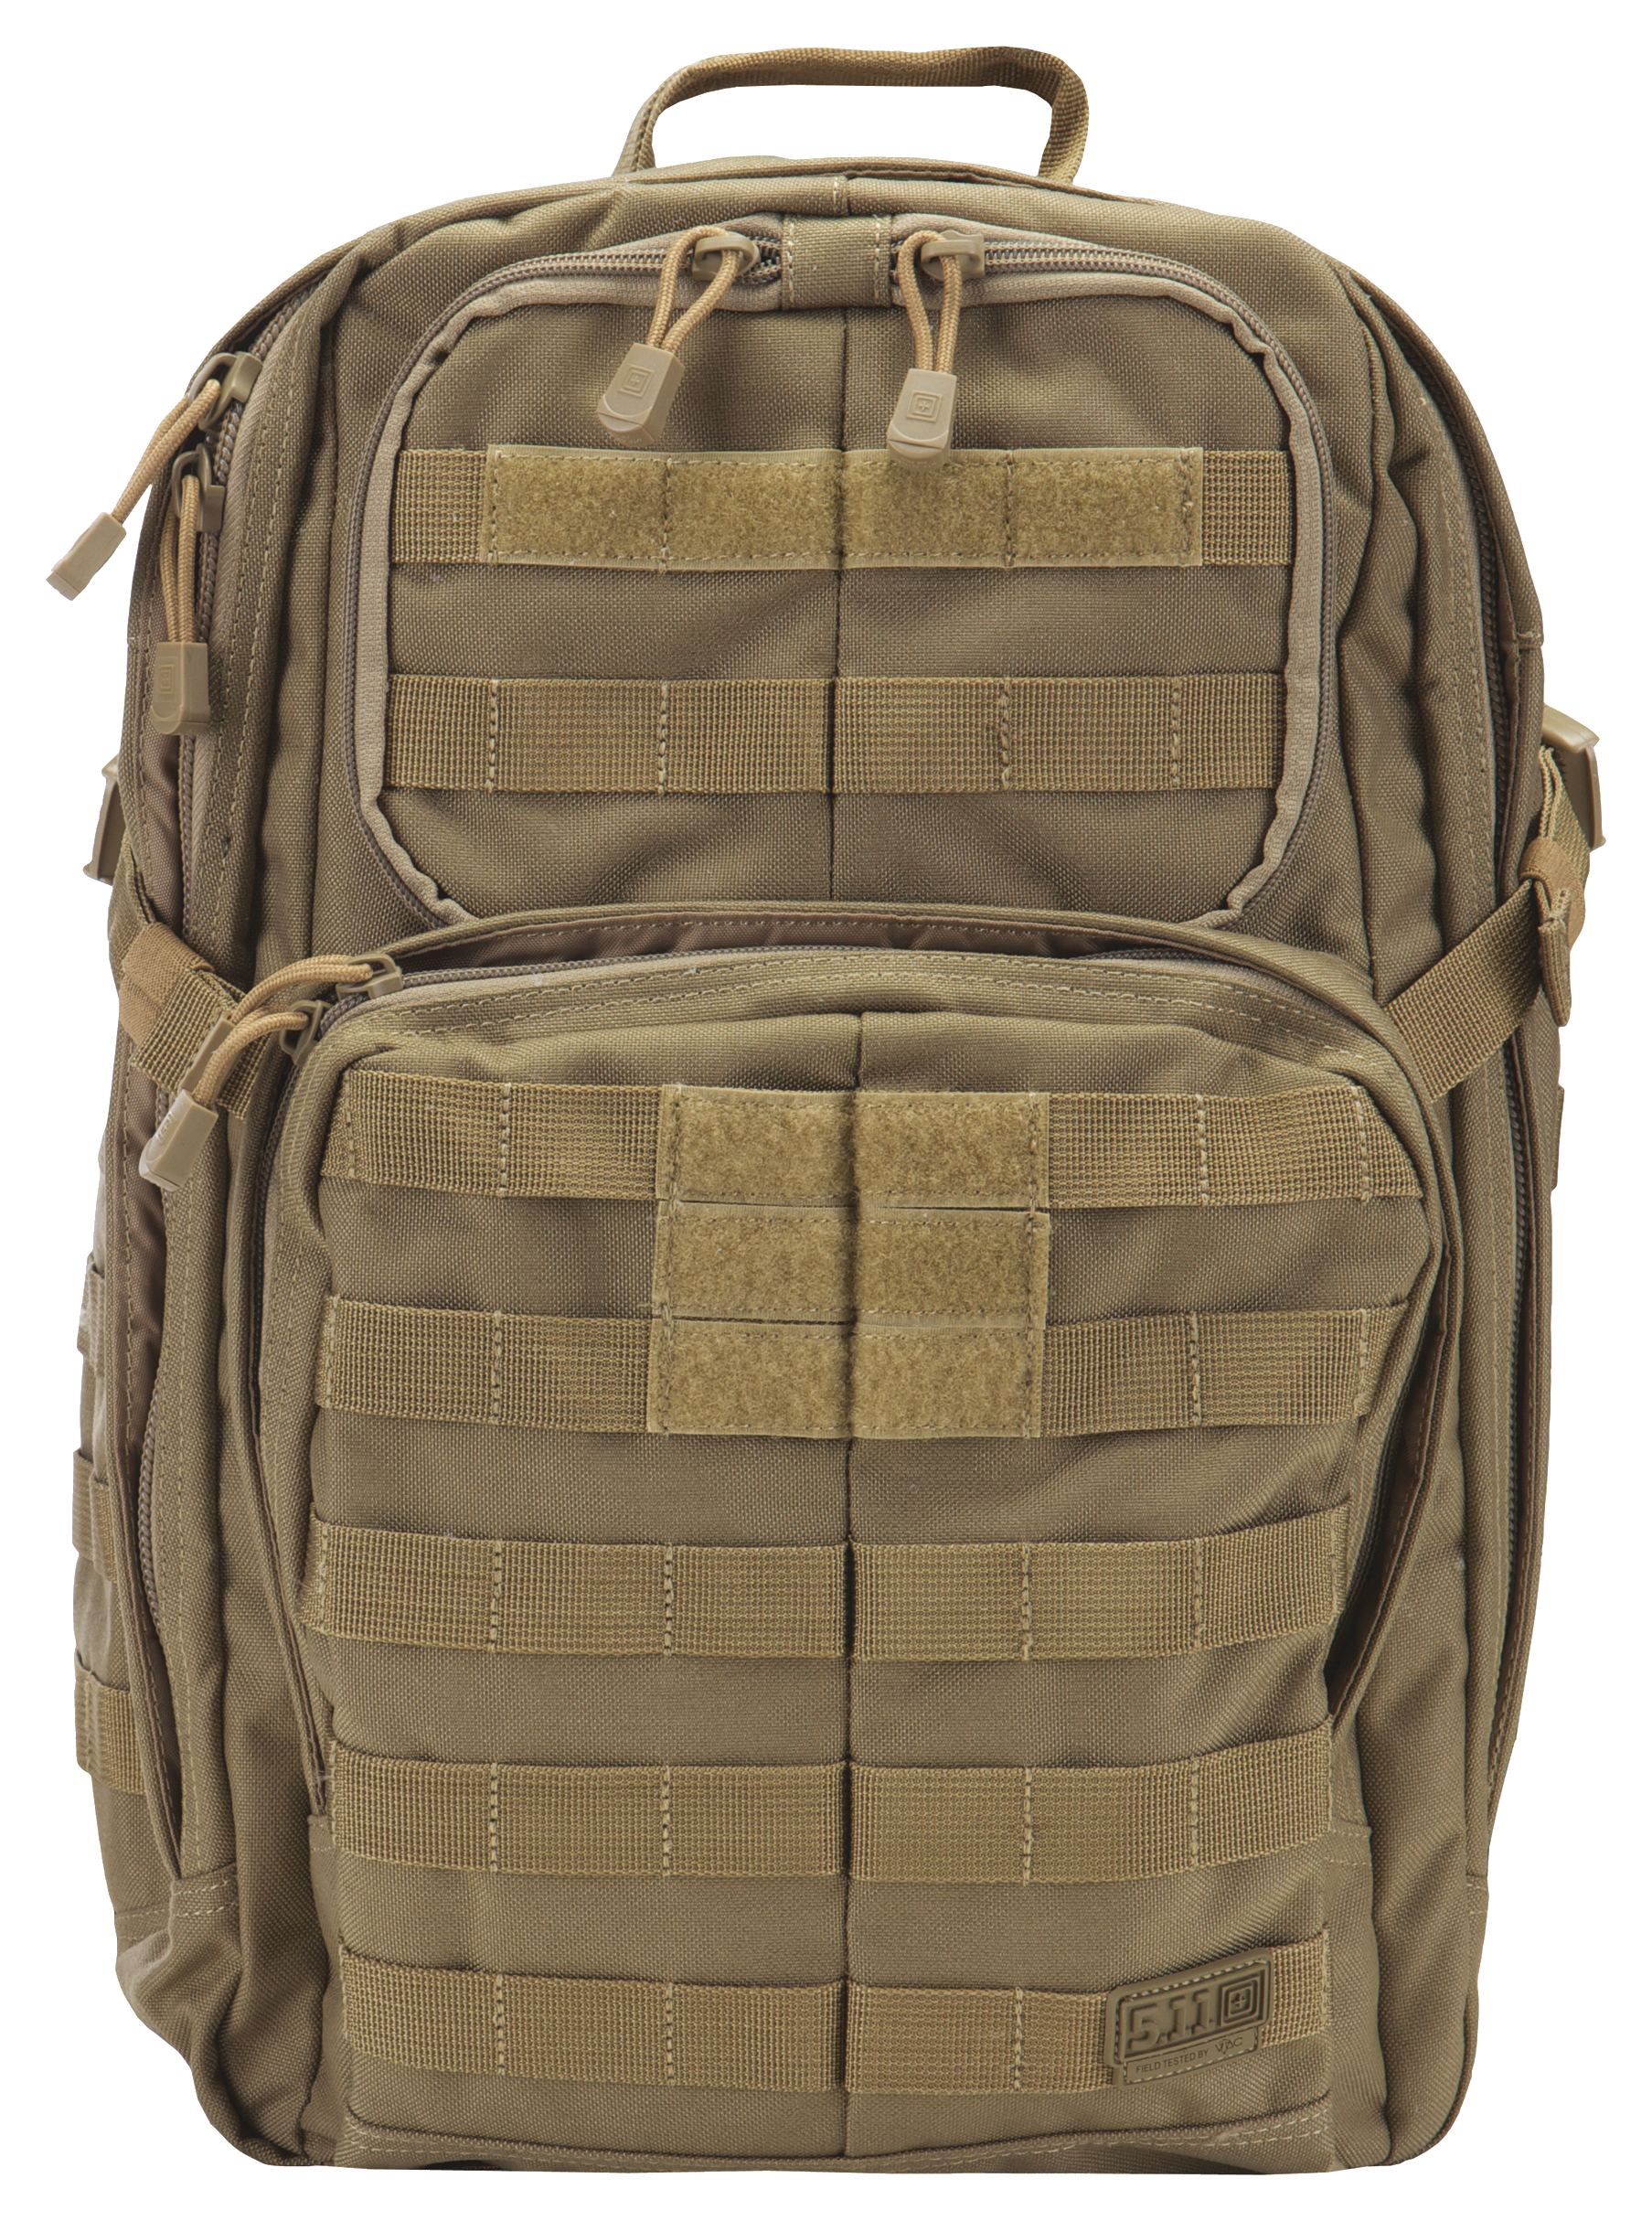 5 11 Tactical   RUSH24 Tactical Backpack - Sandstone